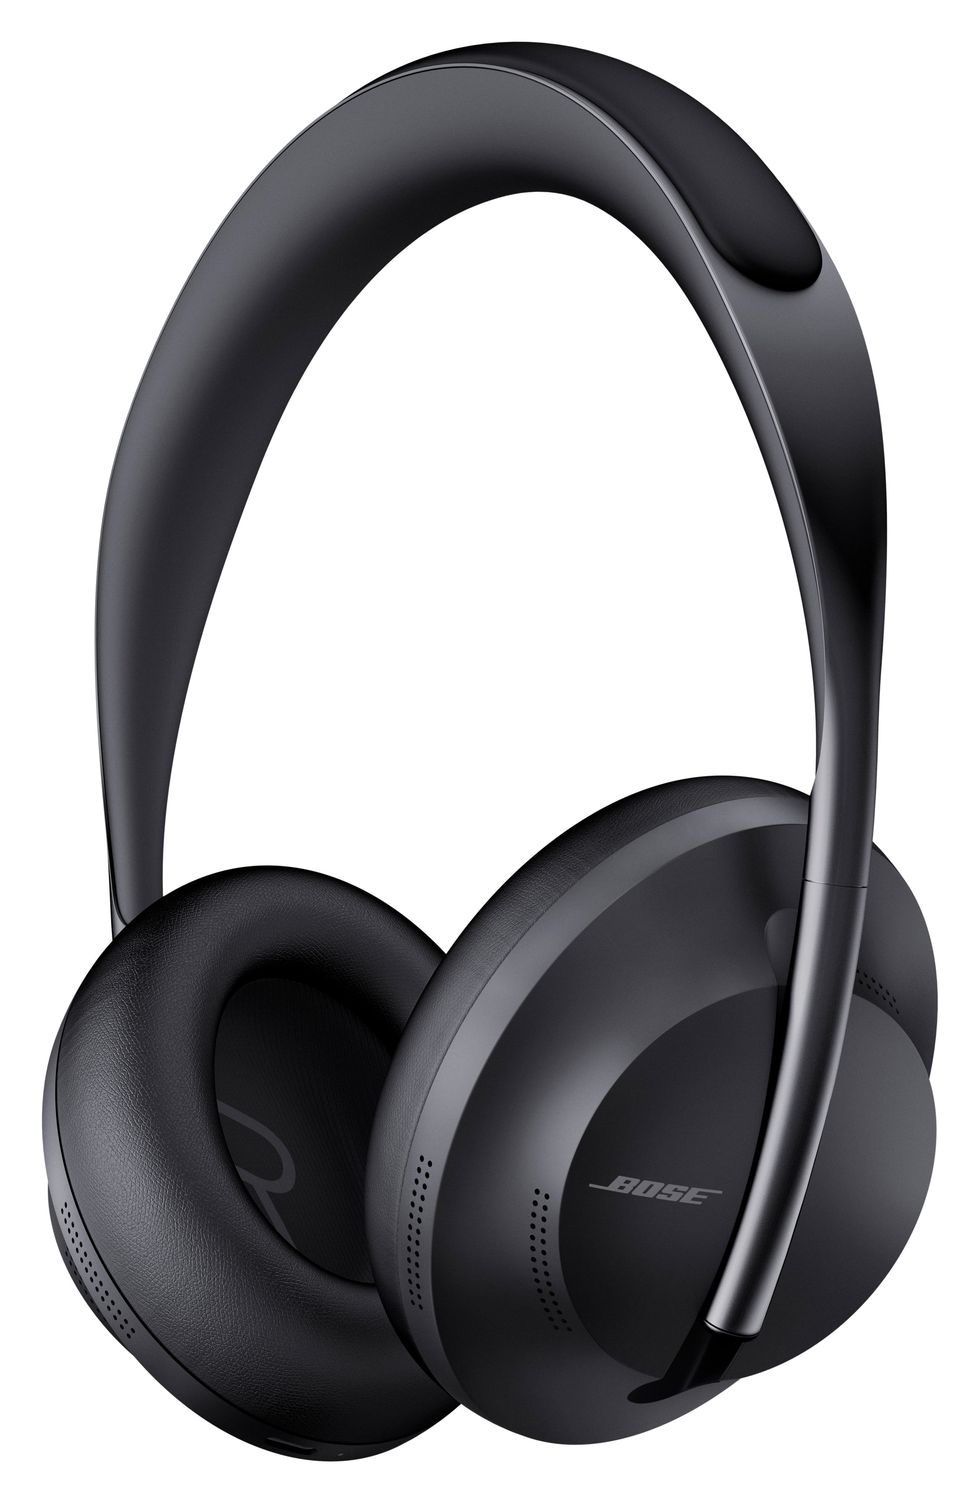 Noise Cancelling 700 Over-Ear Headphones